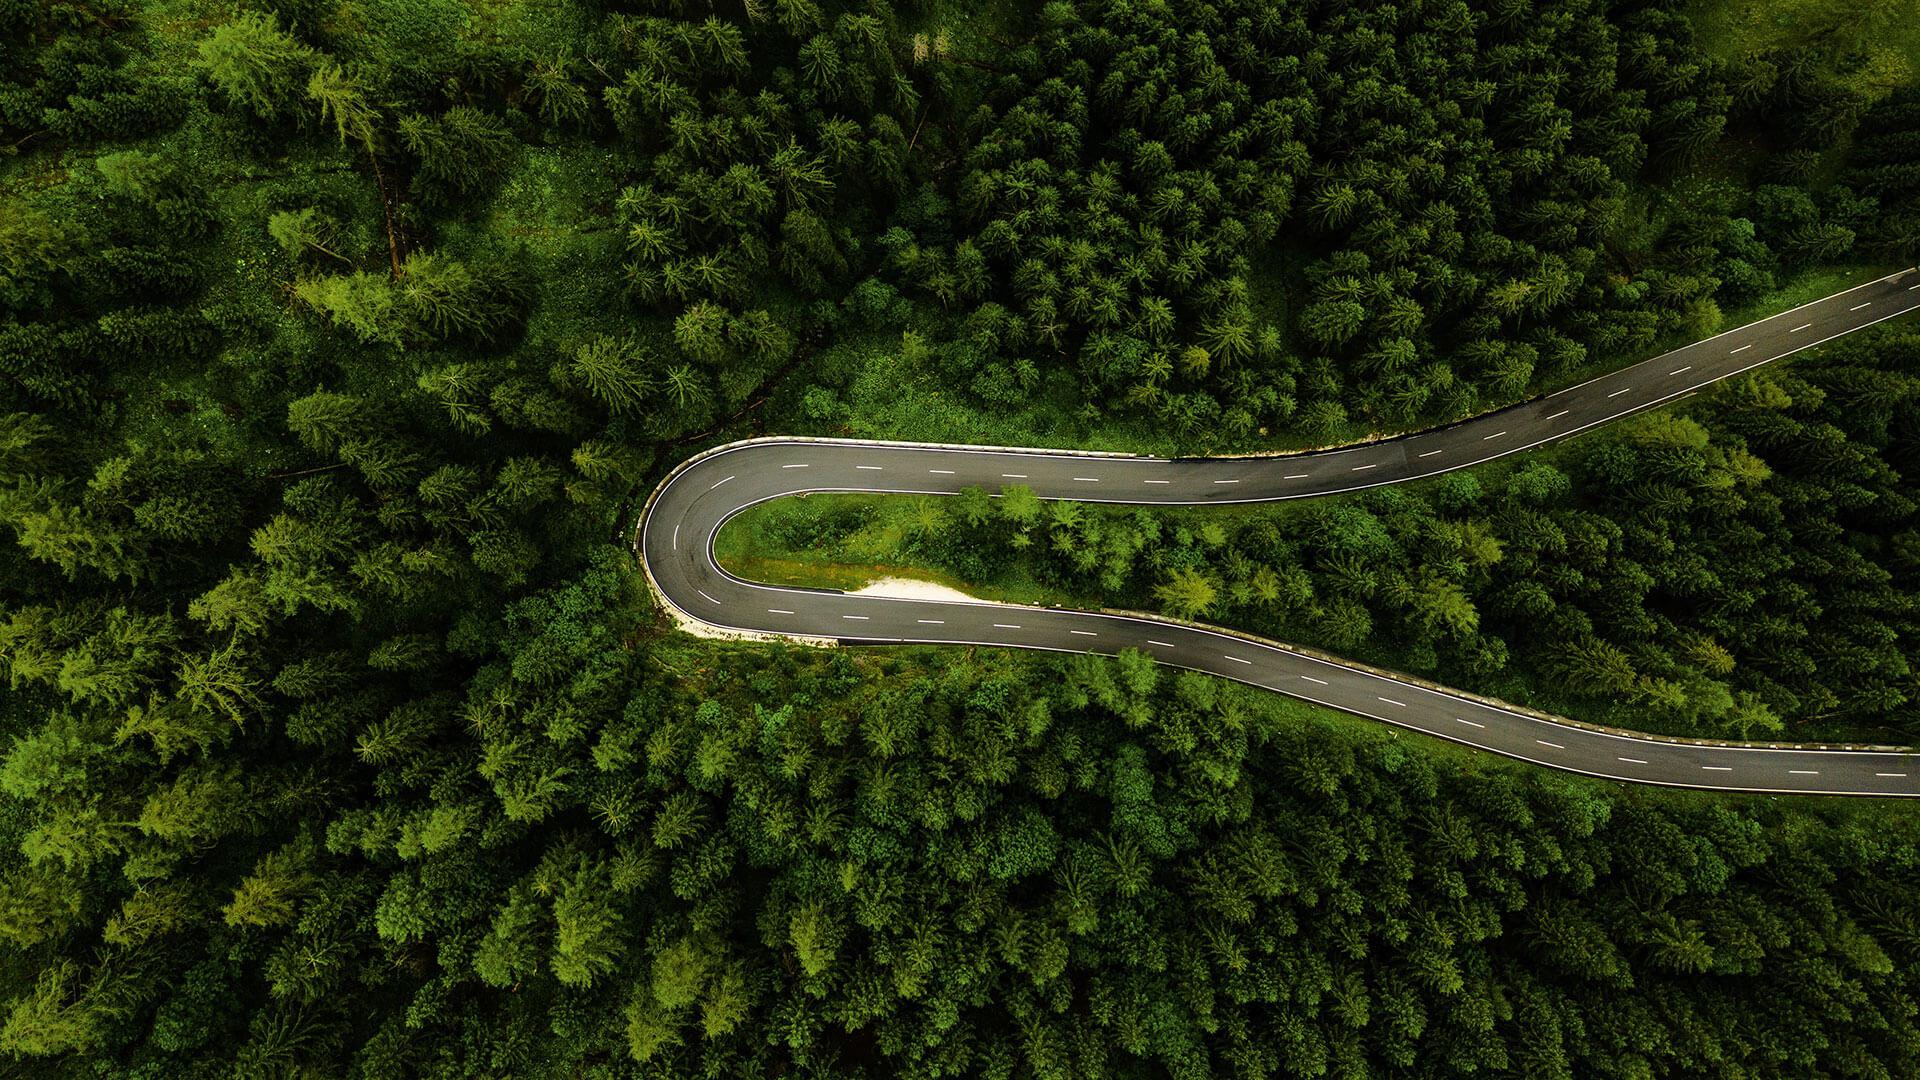 Arial shot of a road in the woods